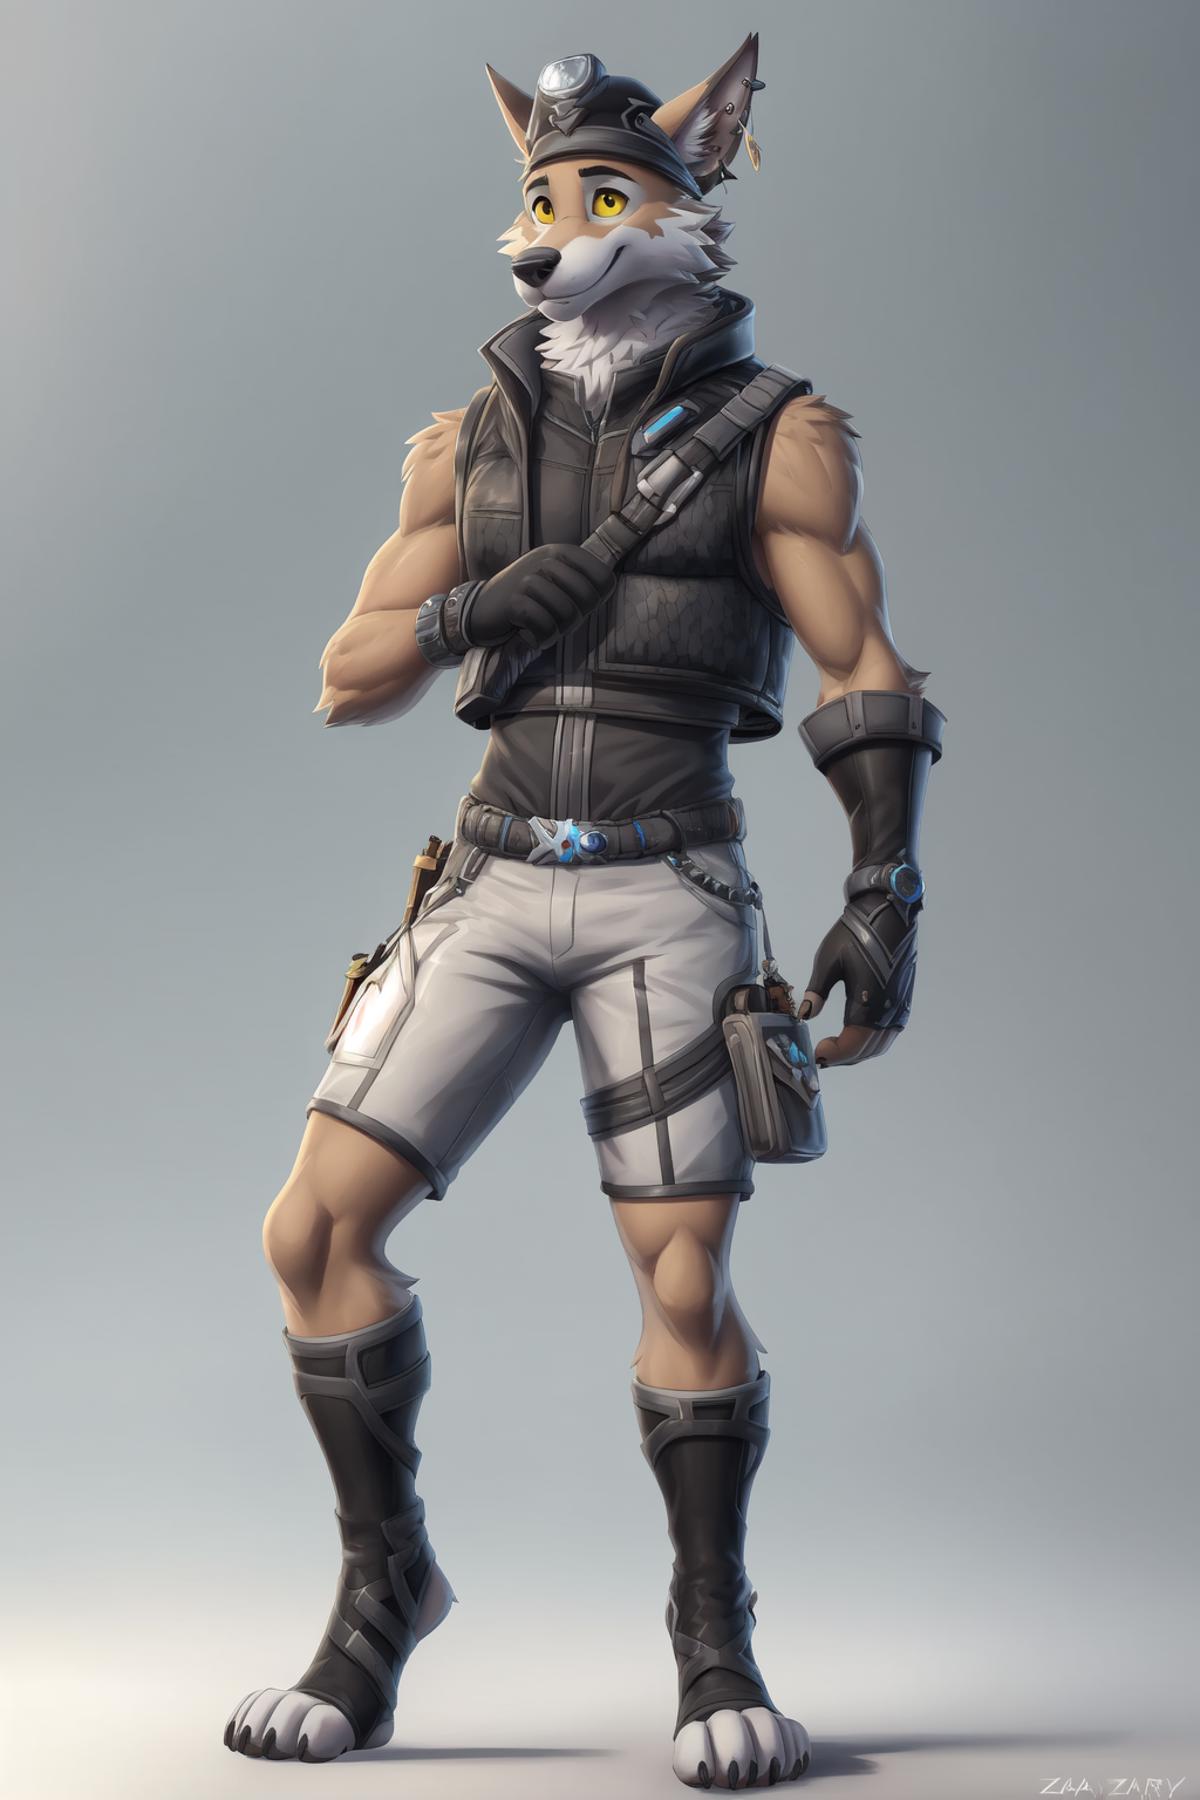 Wendell - Fortnite image by Orion_12